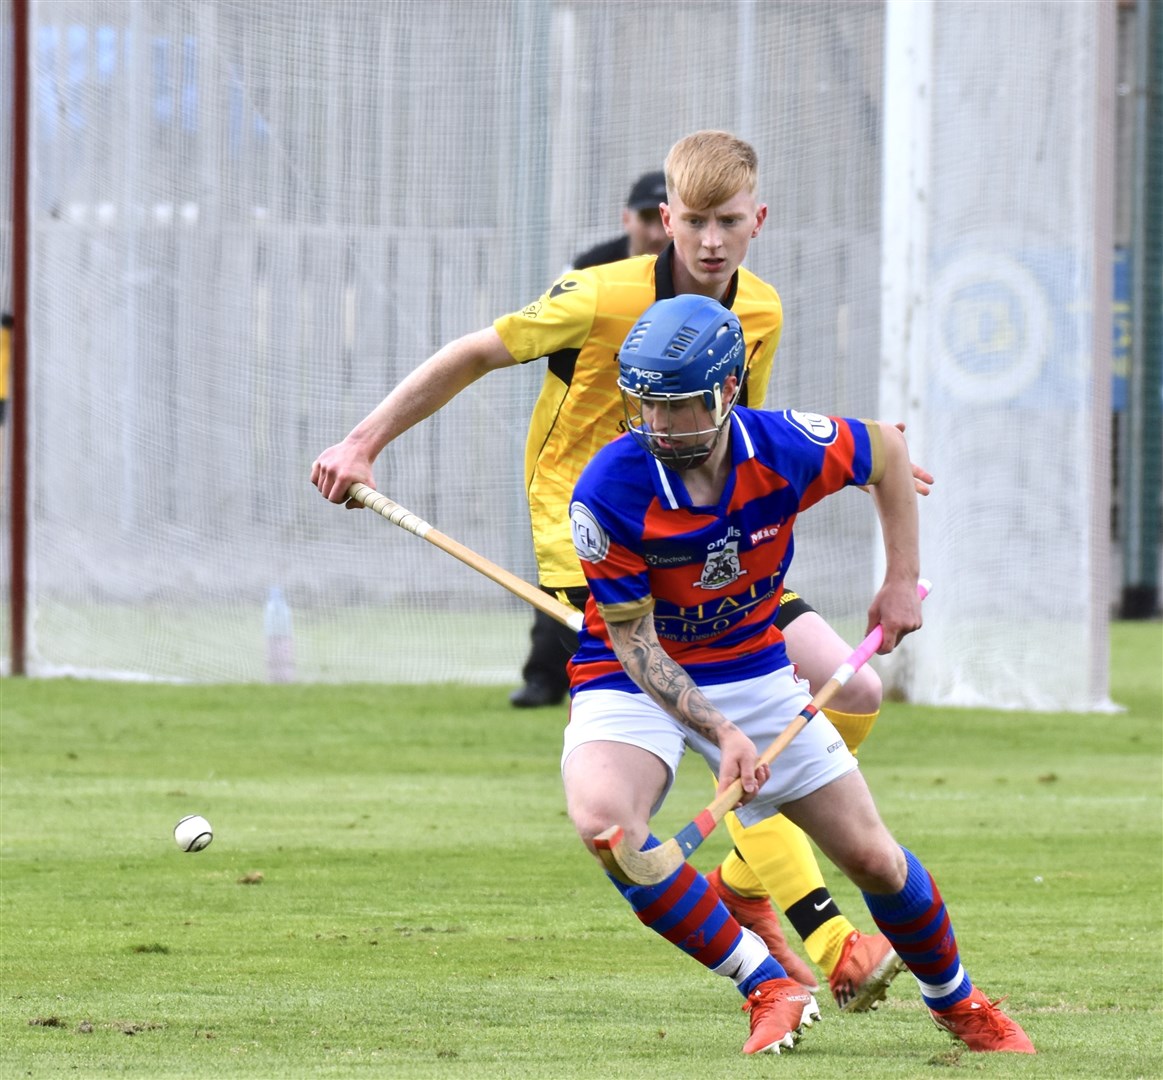 Shinty returned to The Dell at the weekend when the first team played a friendly against Fort William, winning 3-2.